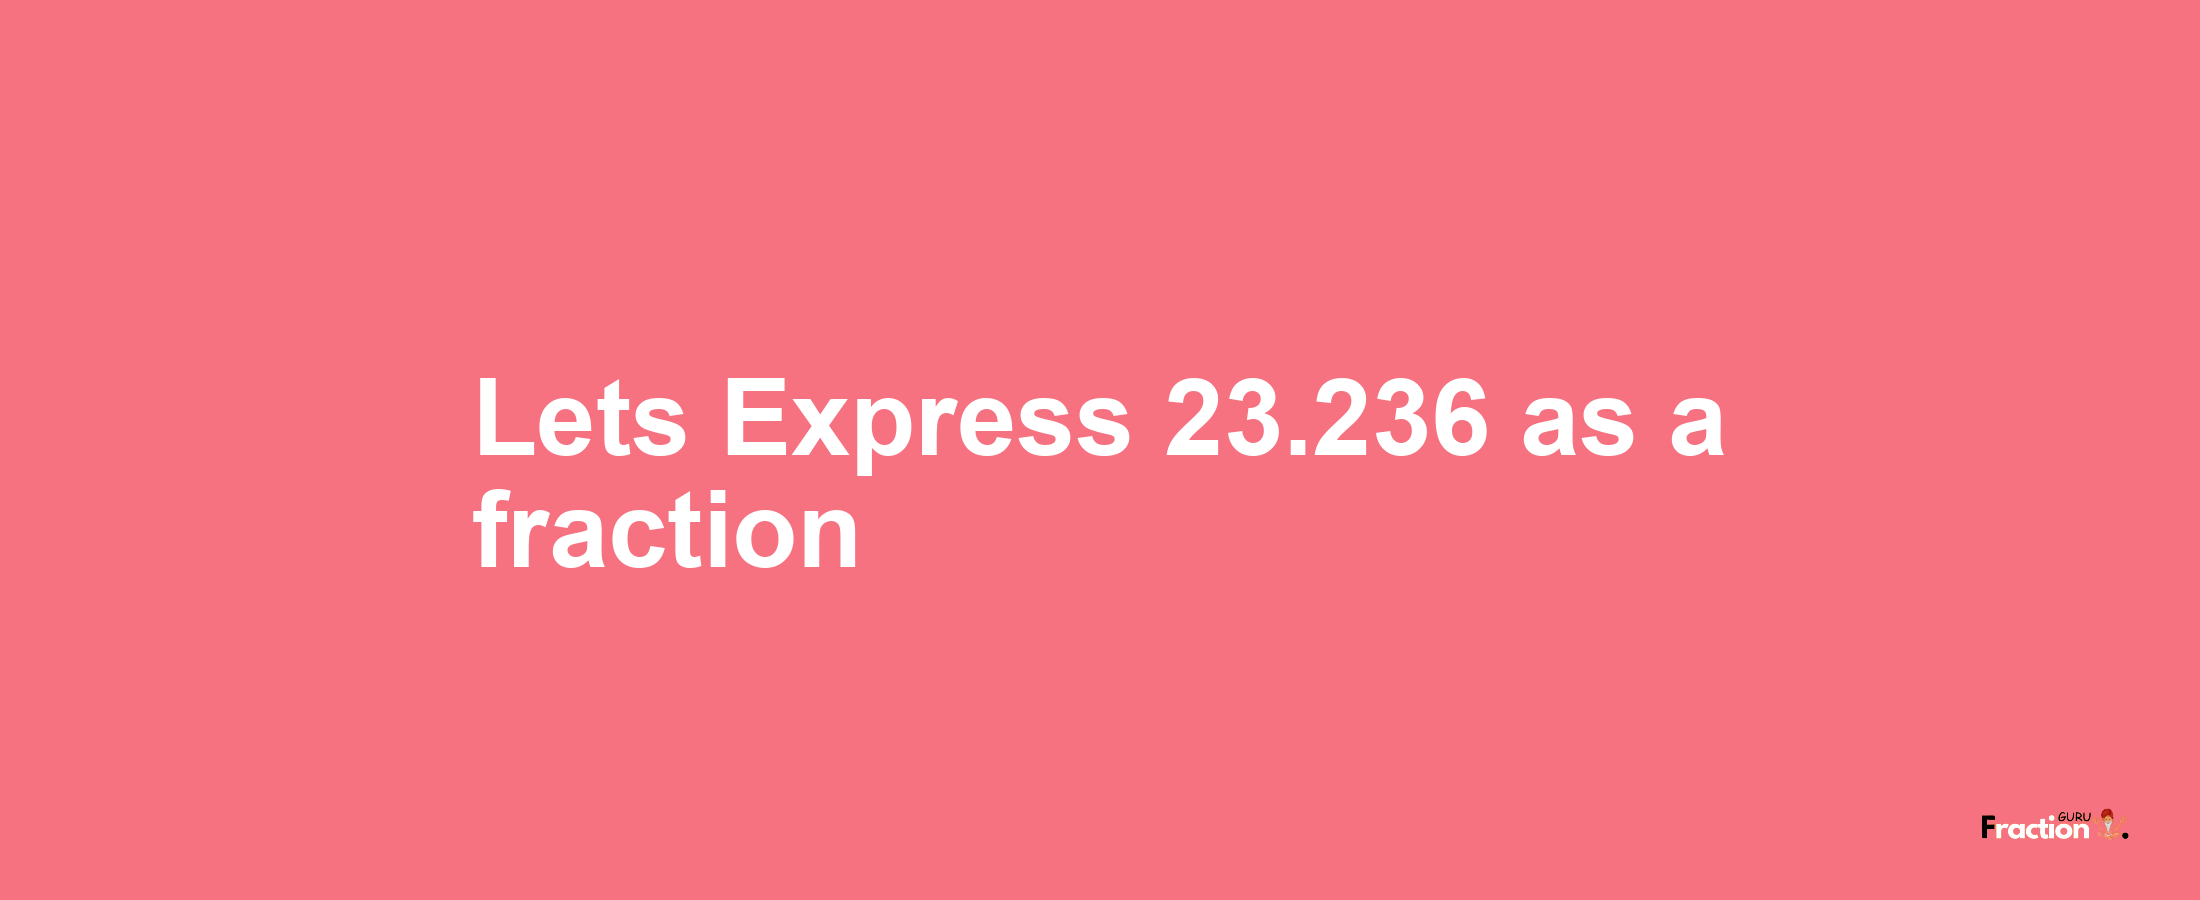 Lets Express 23.236 as afraction